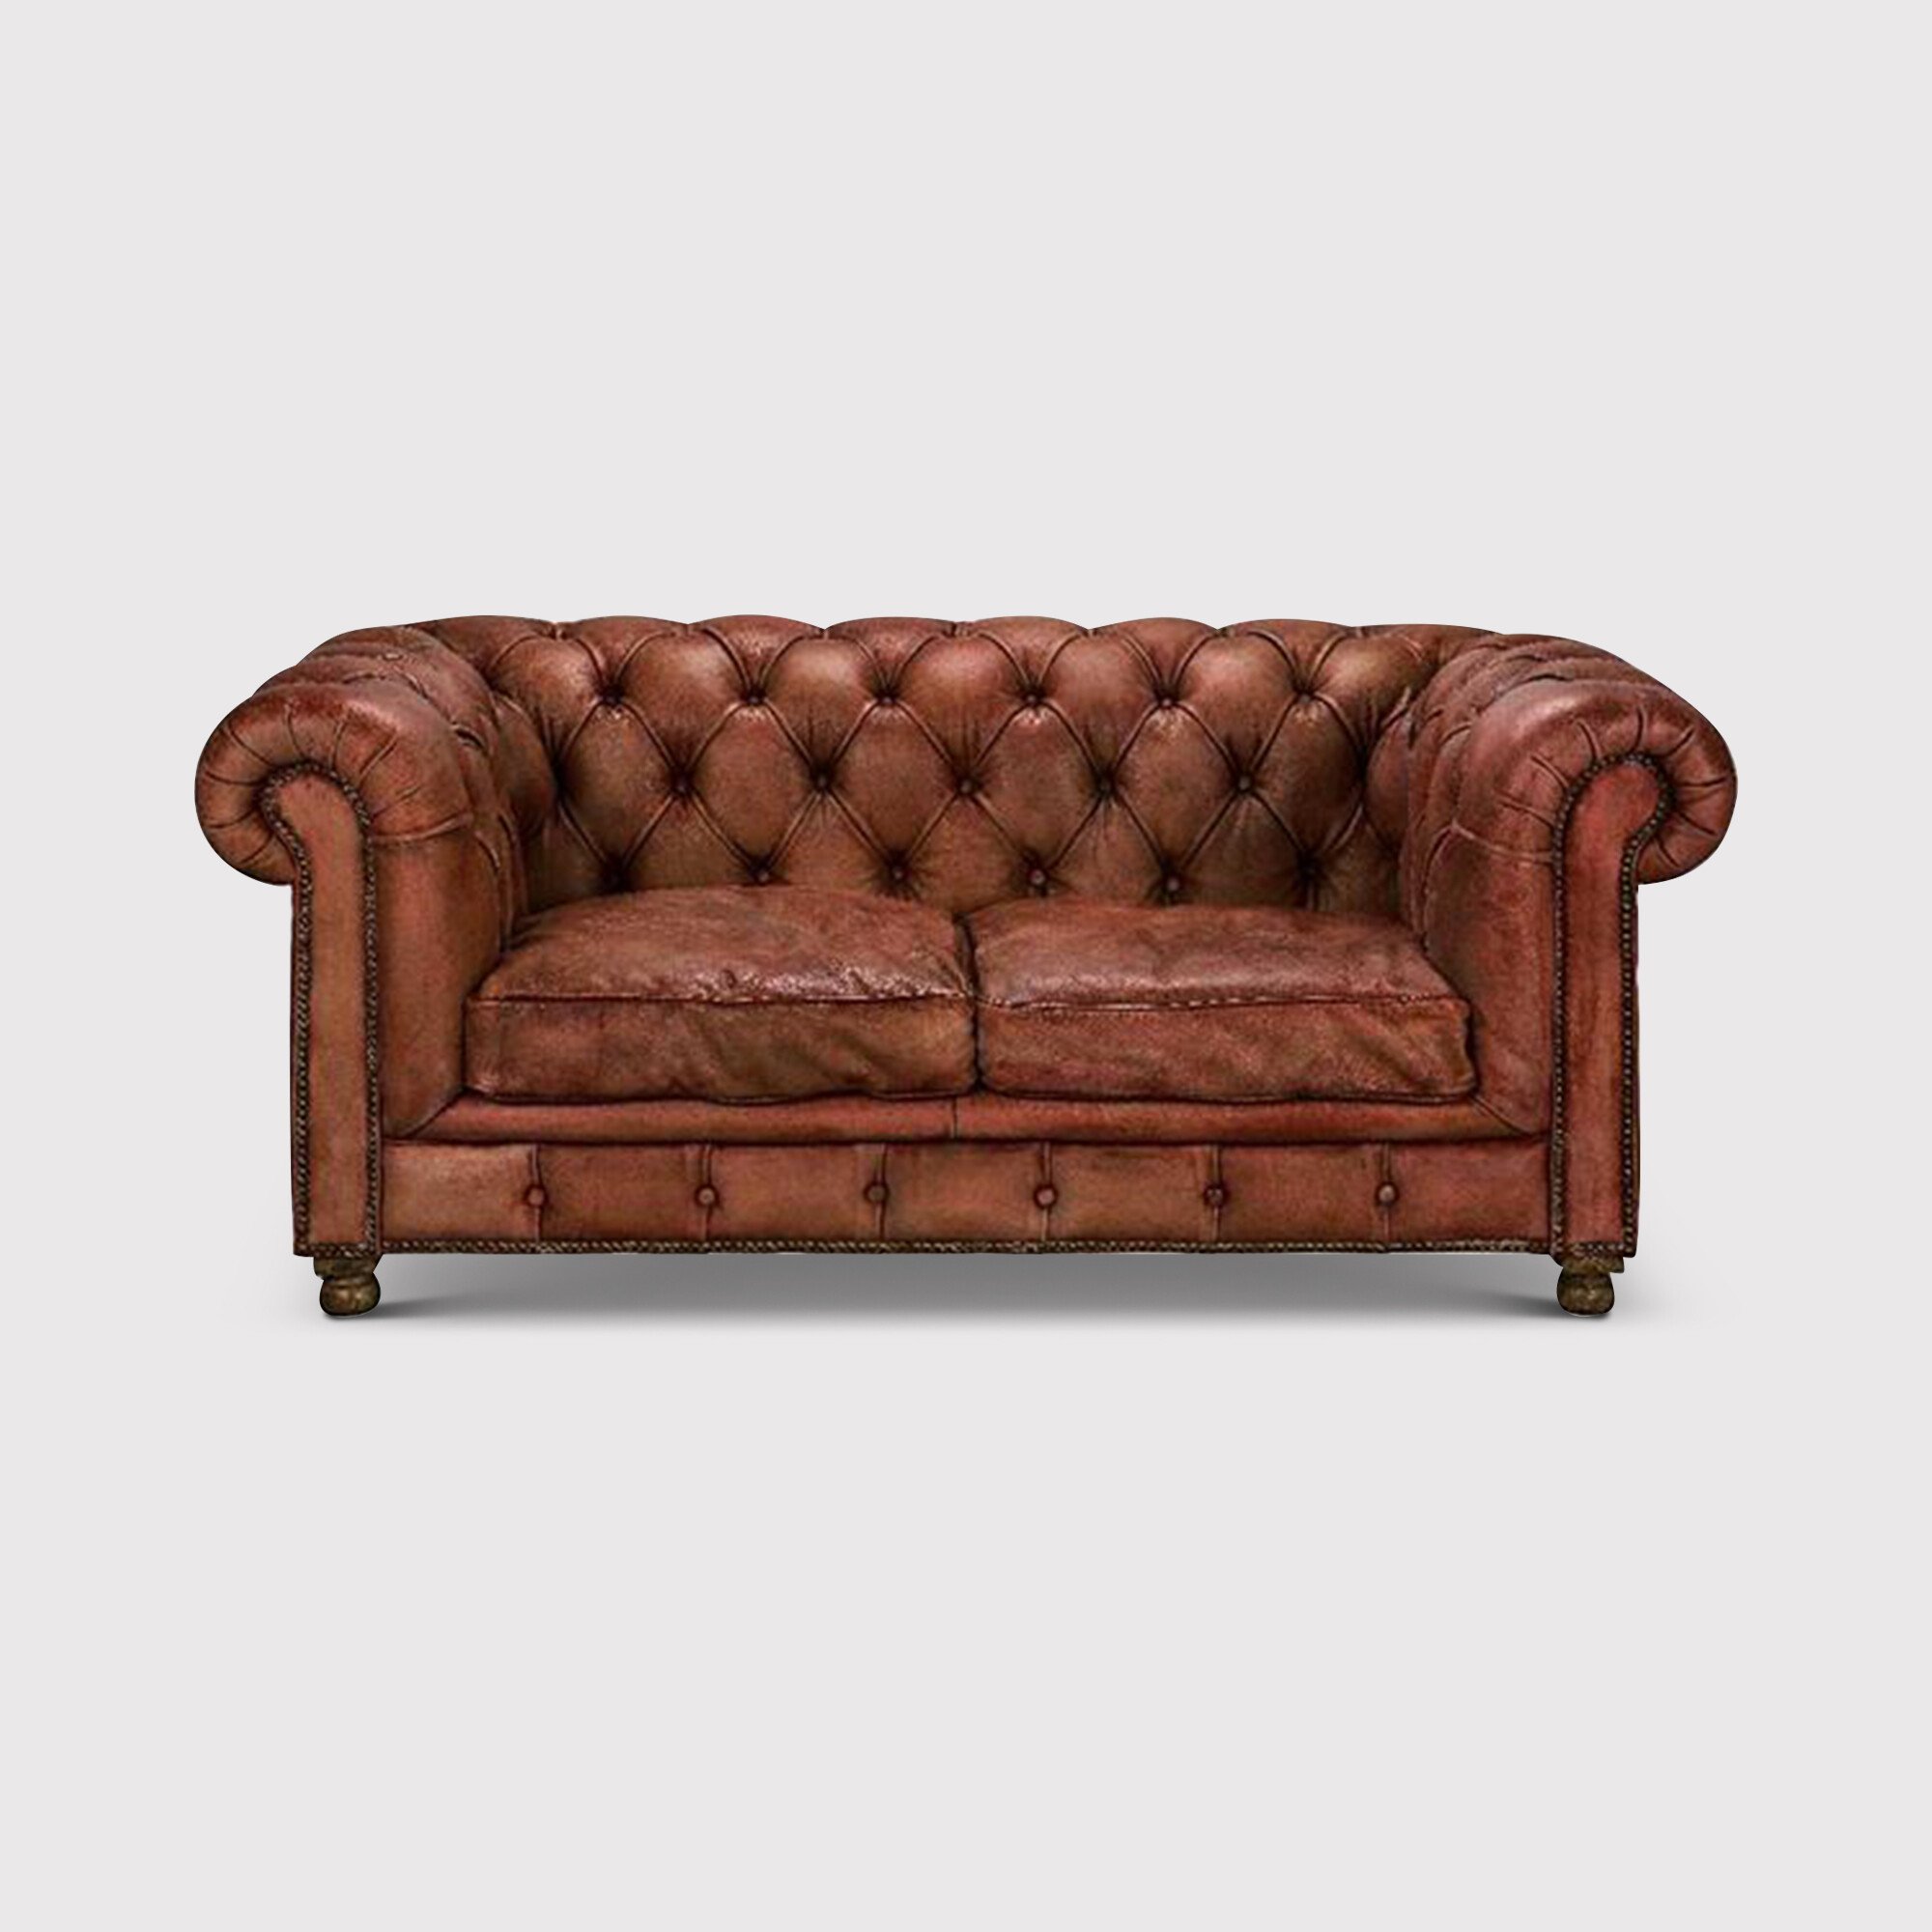 Timothy Oulton Westminster Feather Chesterfield Sofa 2 Seater, Red Leather | Barker & Stonehouse